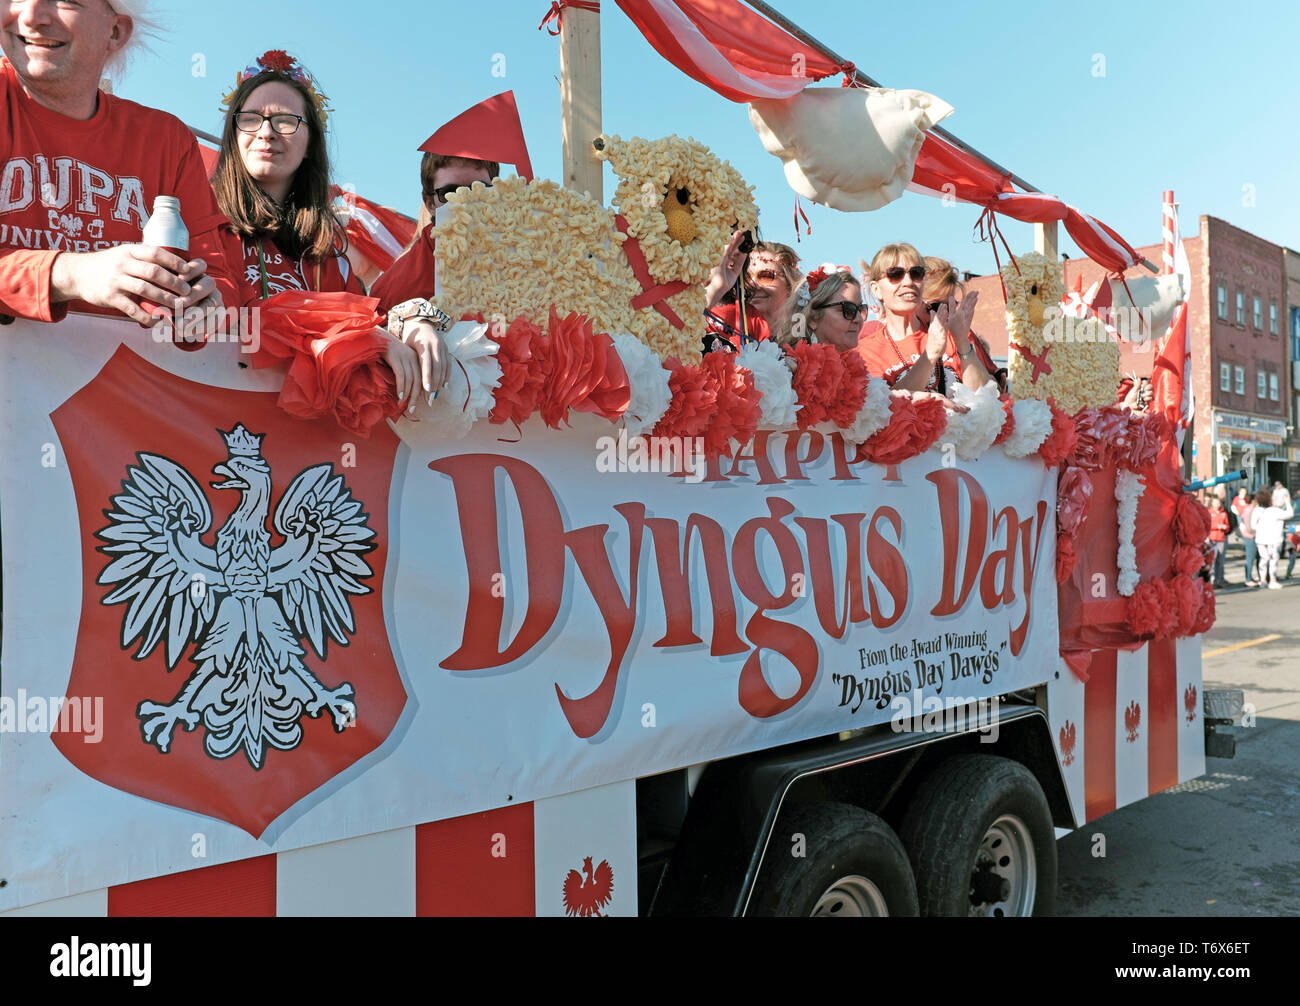 People ride on floats in the annual Dyngus Day Parade in the historic Polonia district of Buffalo, New York where revelry occurs throughout the city. Stock Photo